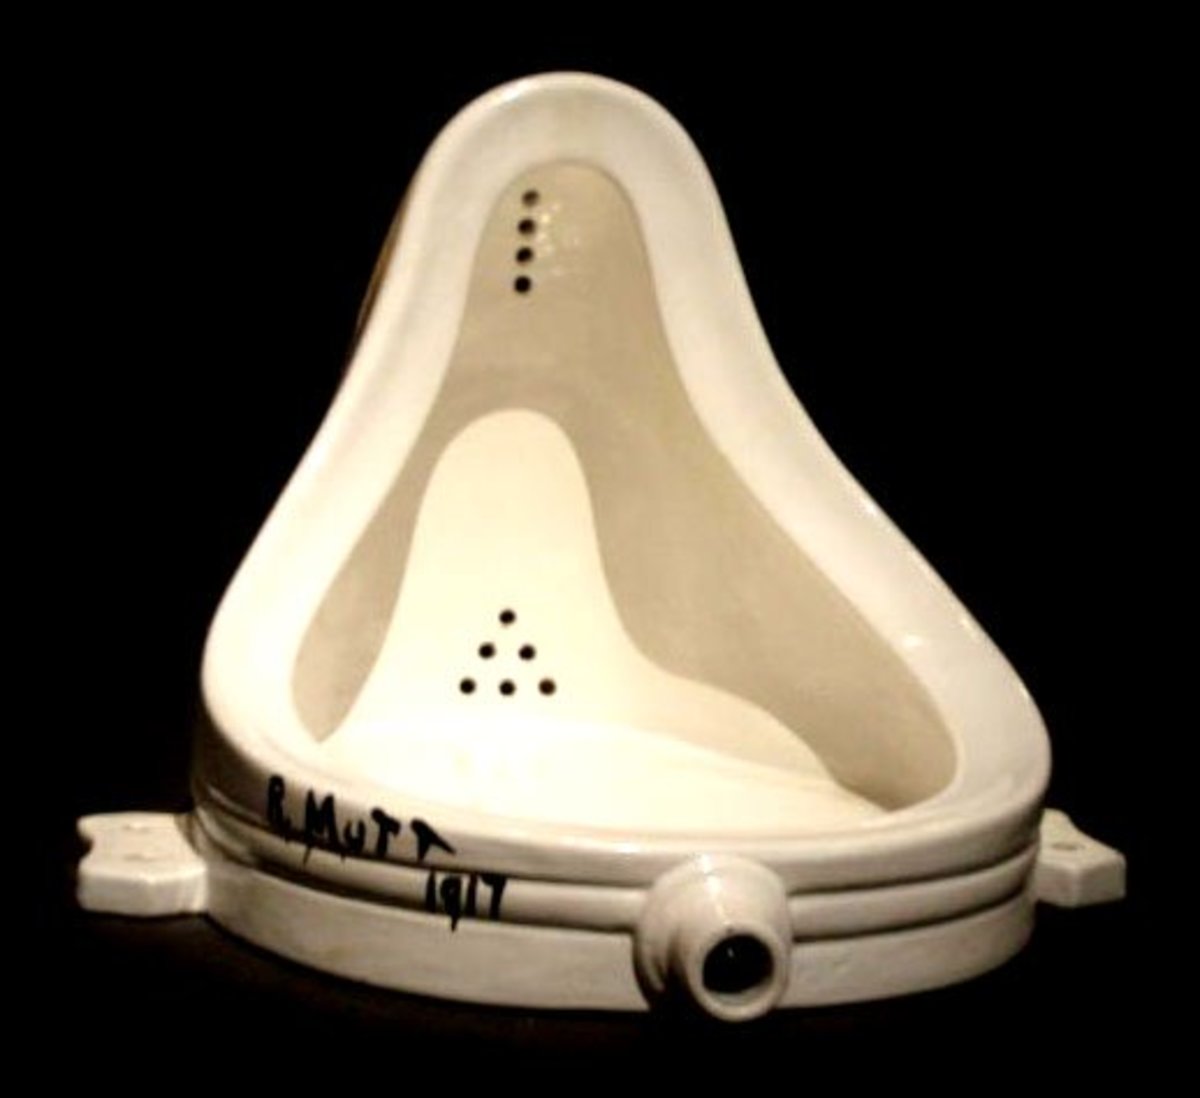 Marcel Duchamp's famous 'Fountain' was a mockery of conventional art and characterized feelings during the Dada era. 